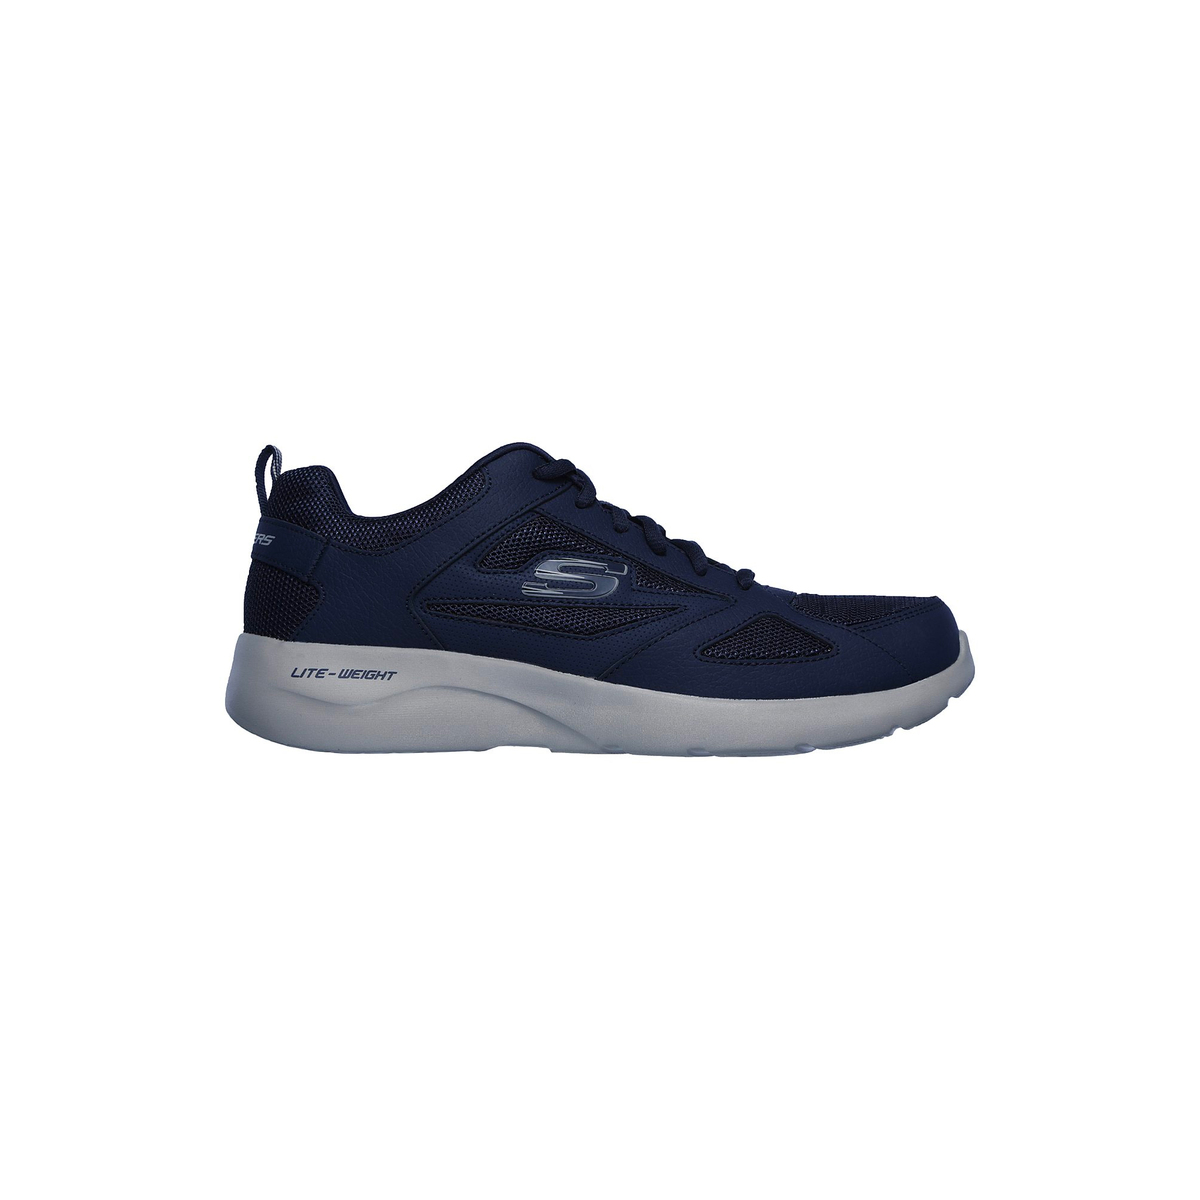 Skechers Men's Shoes Extra Wide 58363 NVY 40 Online at Best Price ...